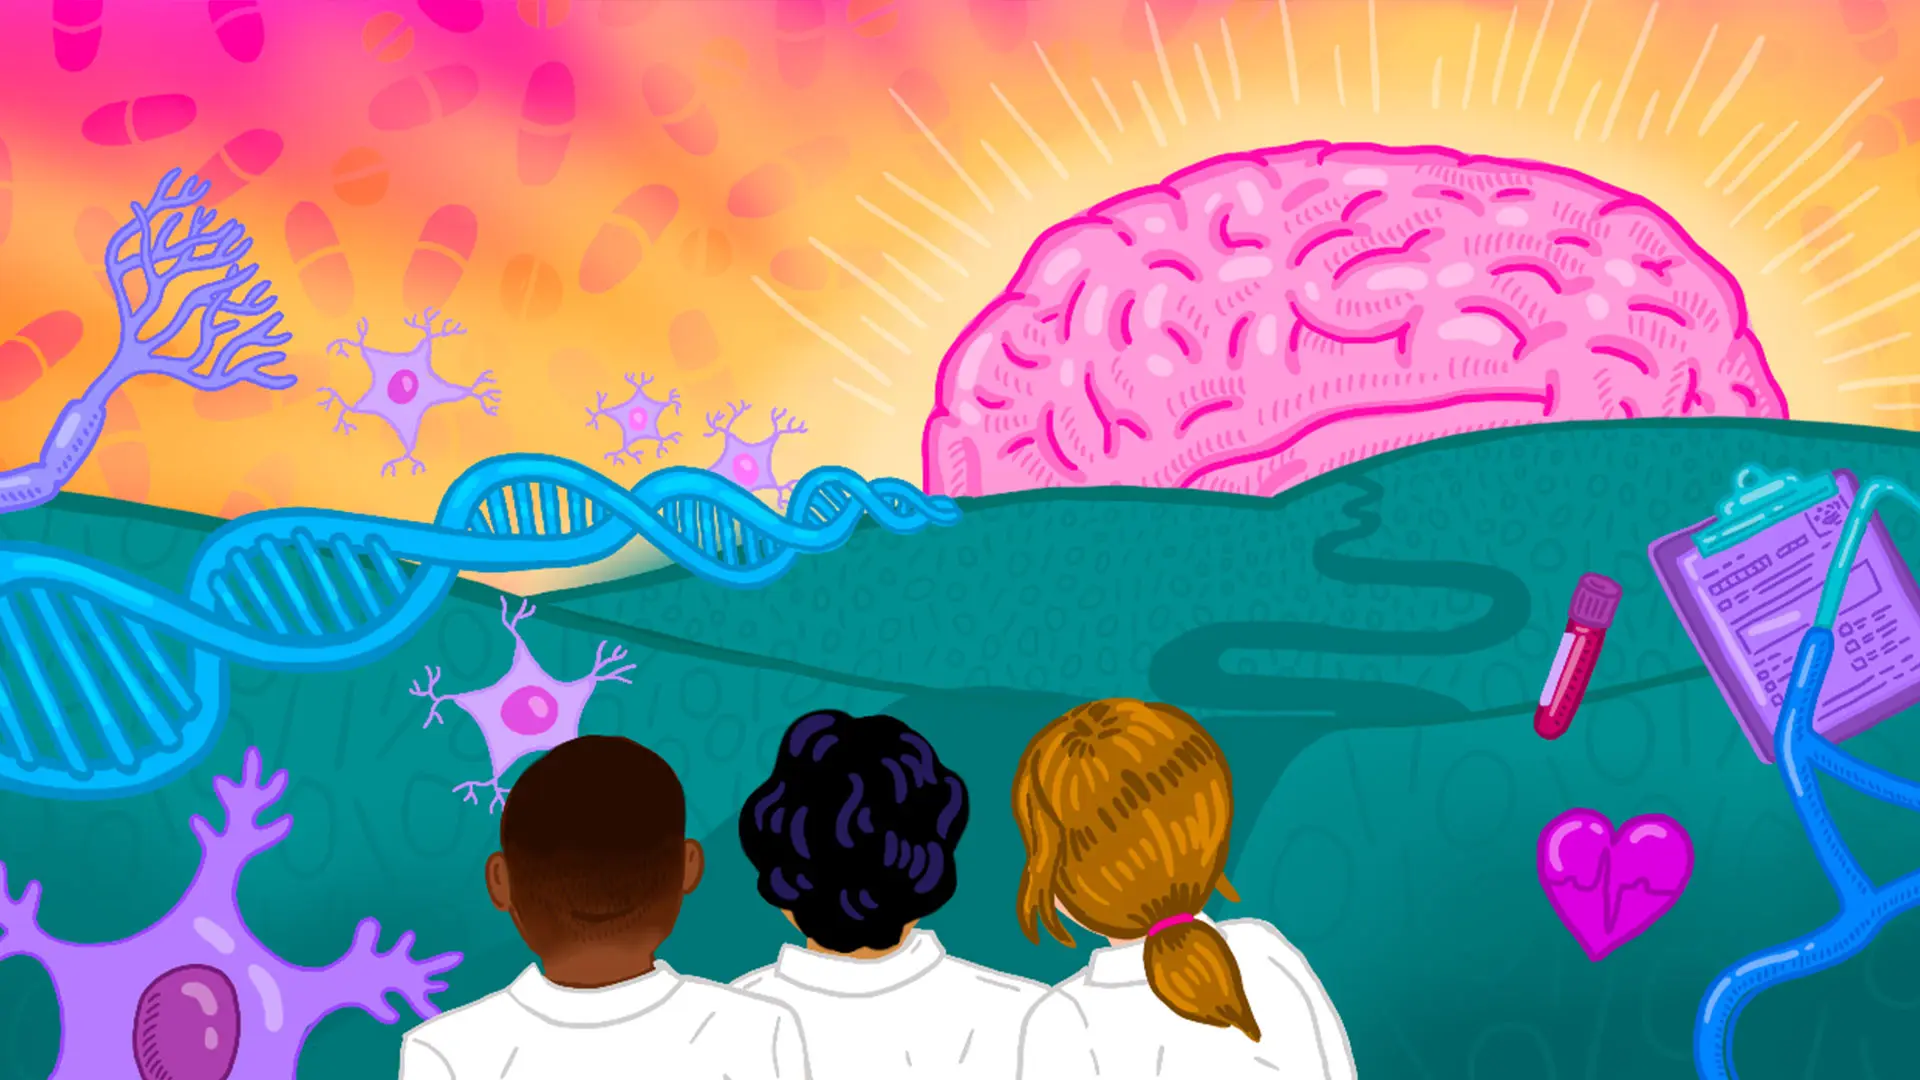 Schematic representation of the Blau Center’s focus on the causes, diagnosis, treatment, and prevention of schizophrenia and other psychotic disorders, across genetic, neural, behavioral, and environmental dimensions. Image by Jessica S. Johnson, Icahn School of Medicine at Mount Sinai.